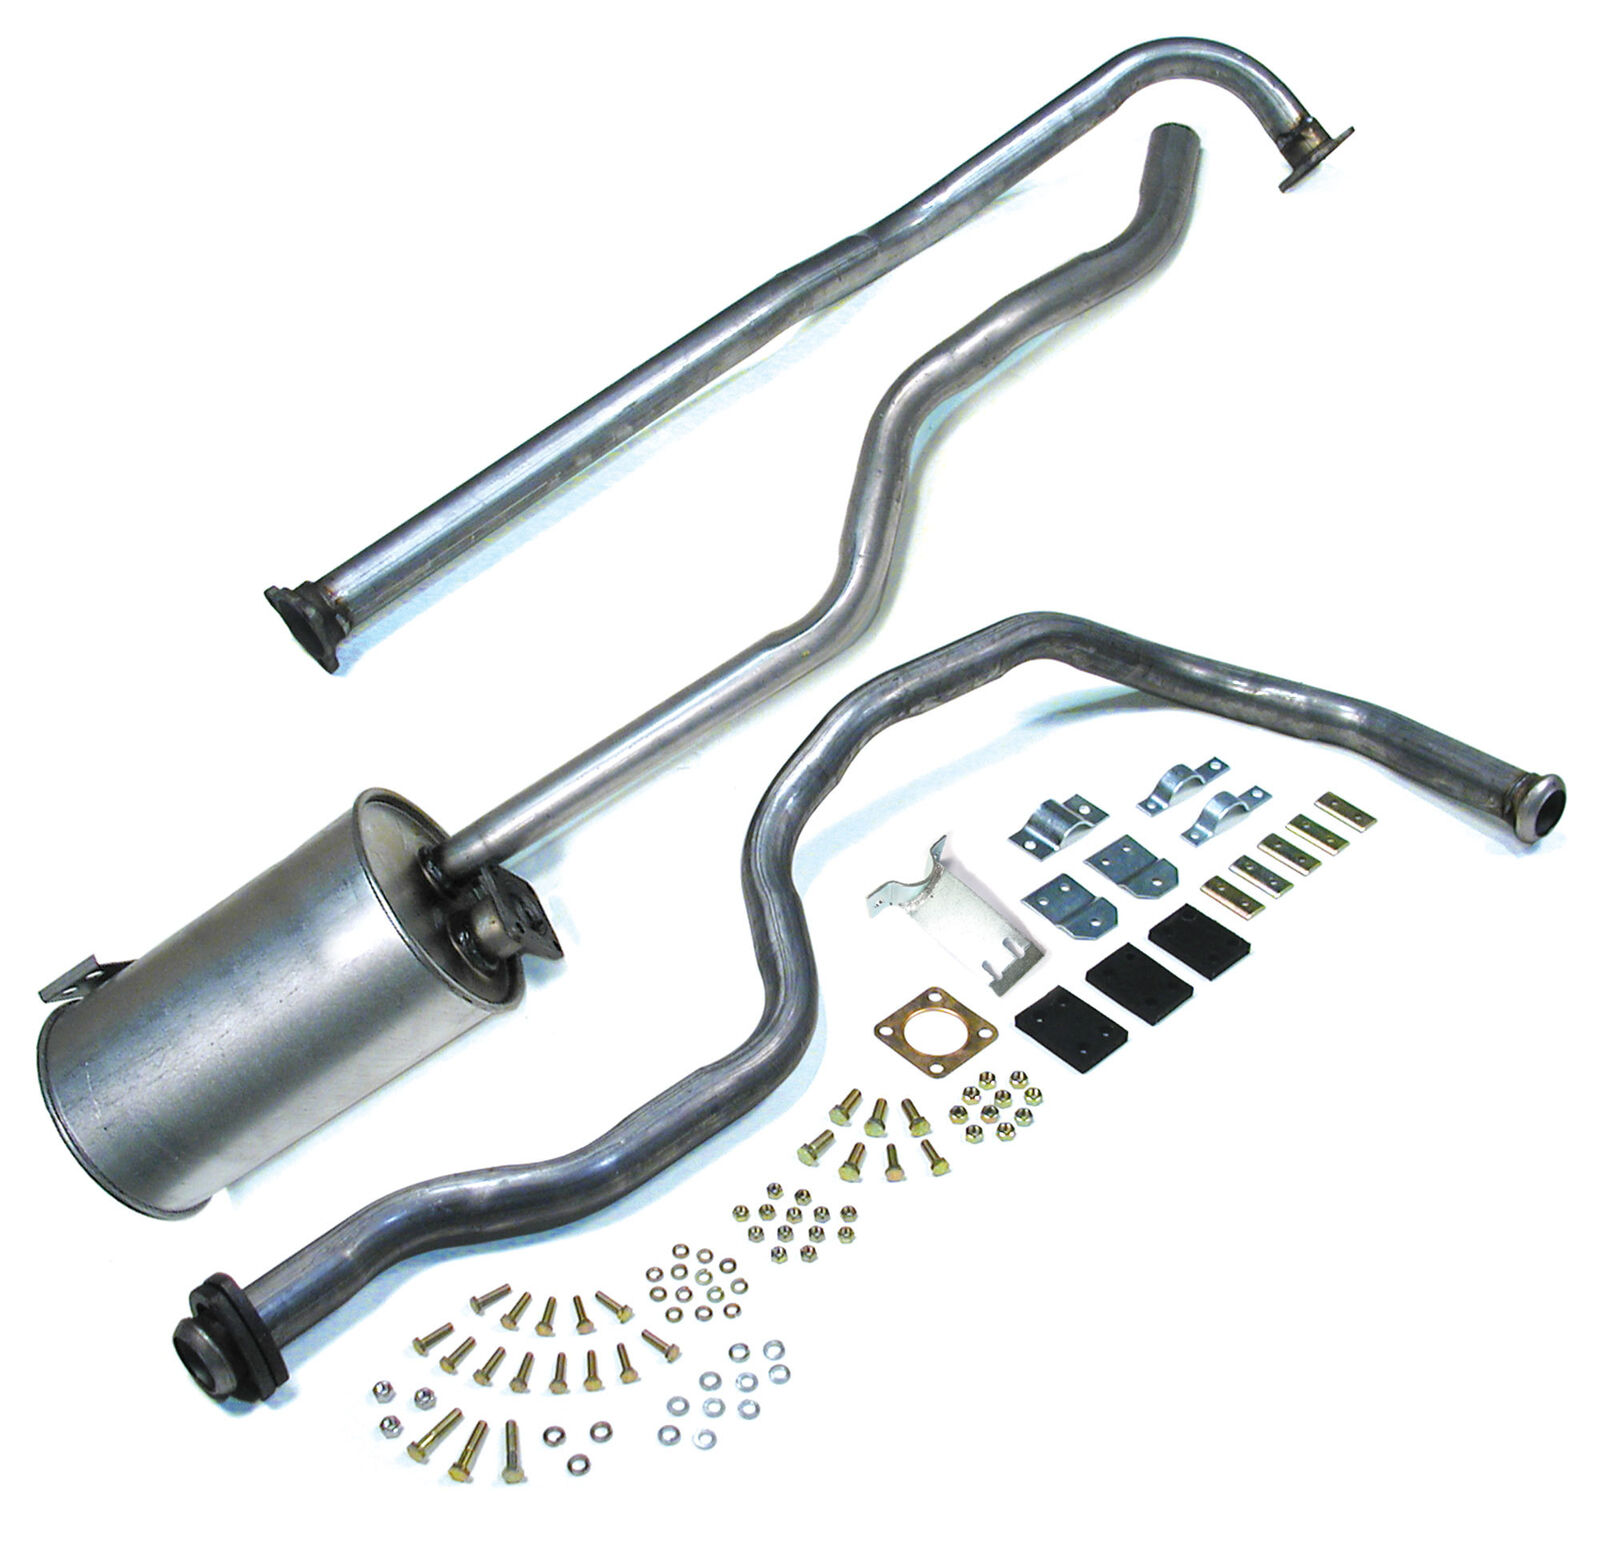 Standard Exhaust System with Muffler & Tailpipe for Land Rover Series2, 2A, & 3